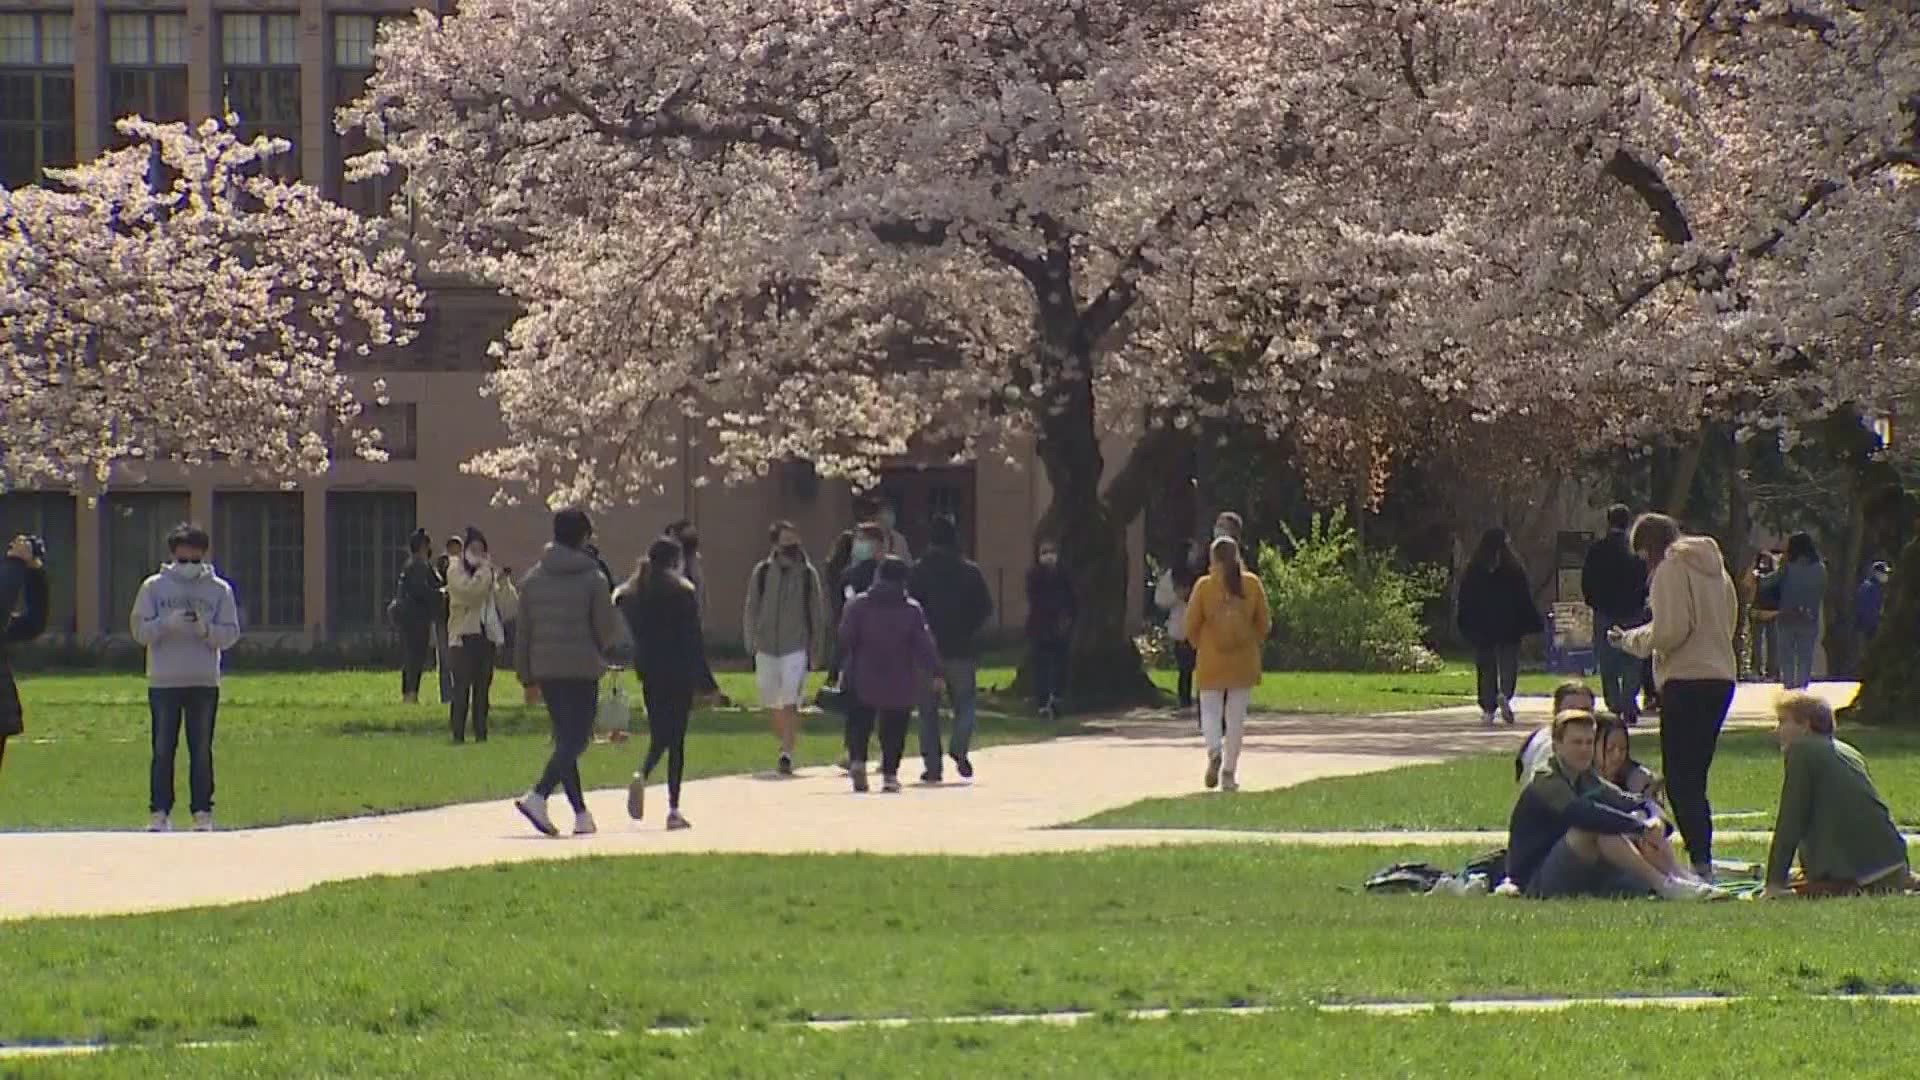 Many students are returning from spring break travels or activities and bringing the virus with them.